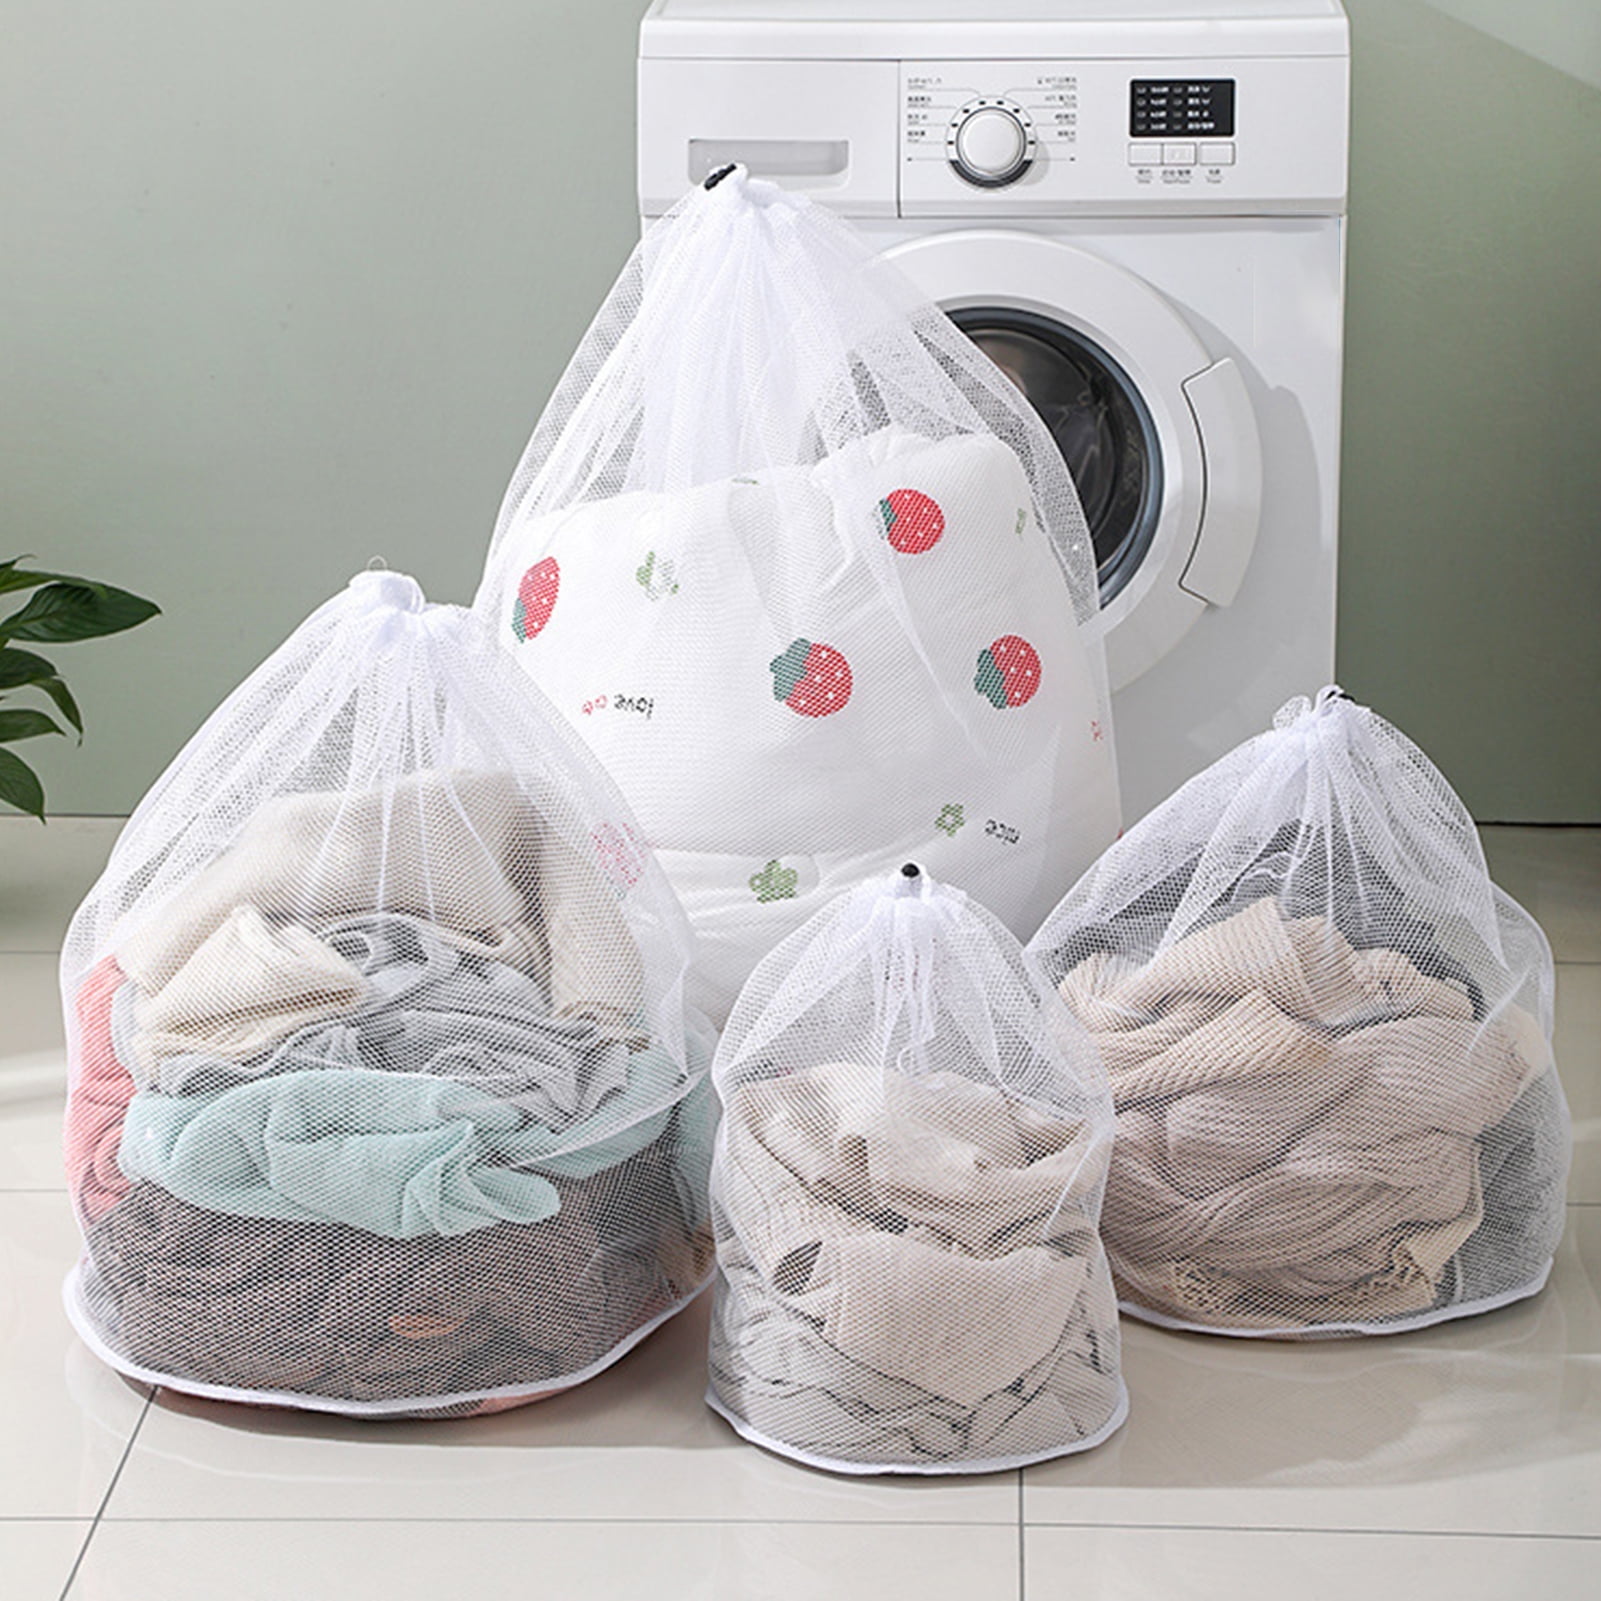 How to Use Mesh Laundry Bags to Make Your Life Easier: 15 Tips